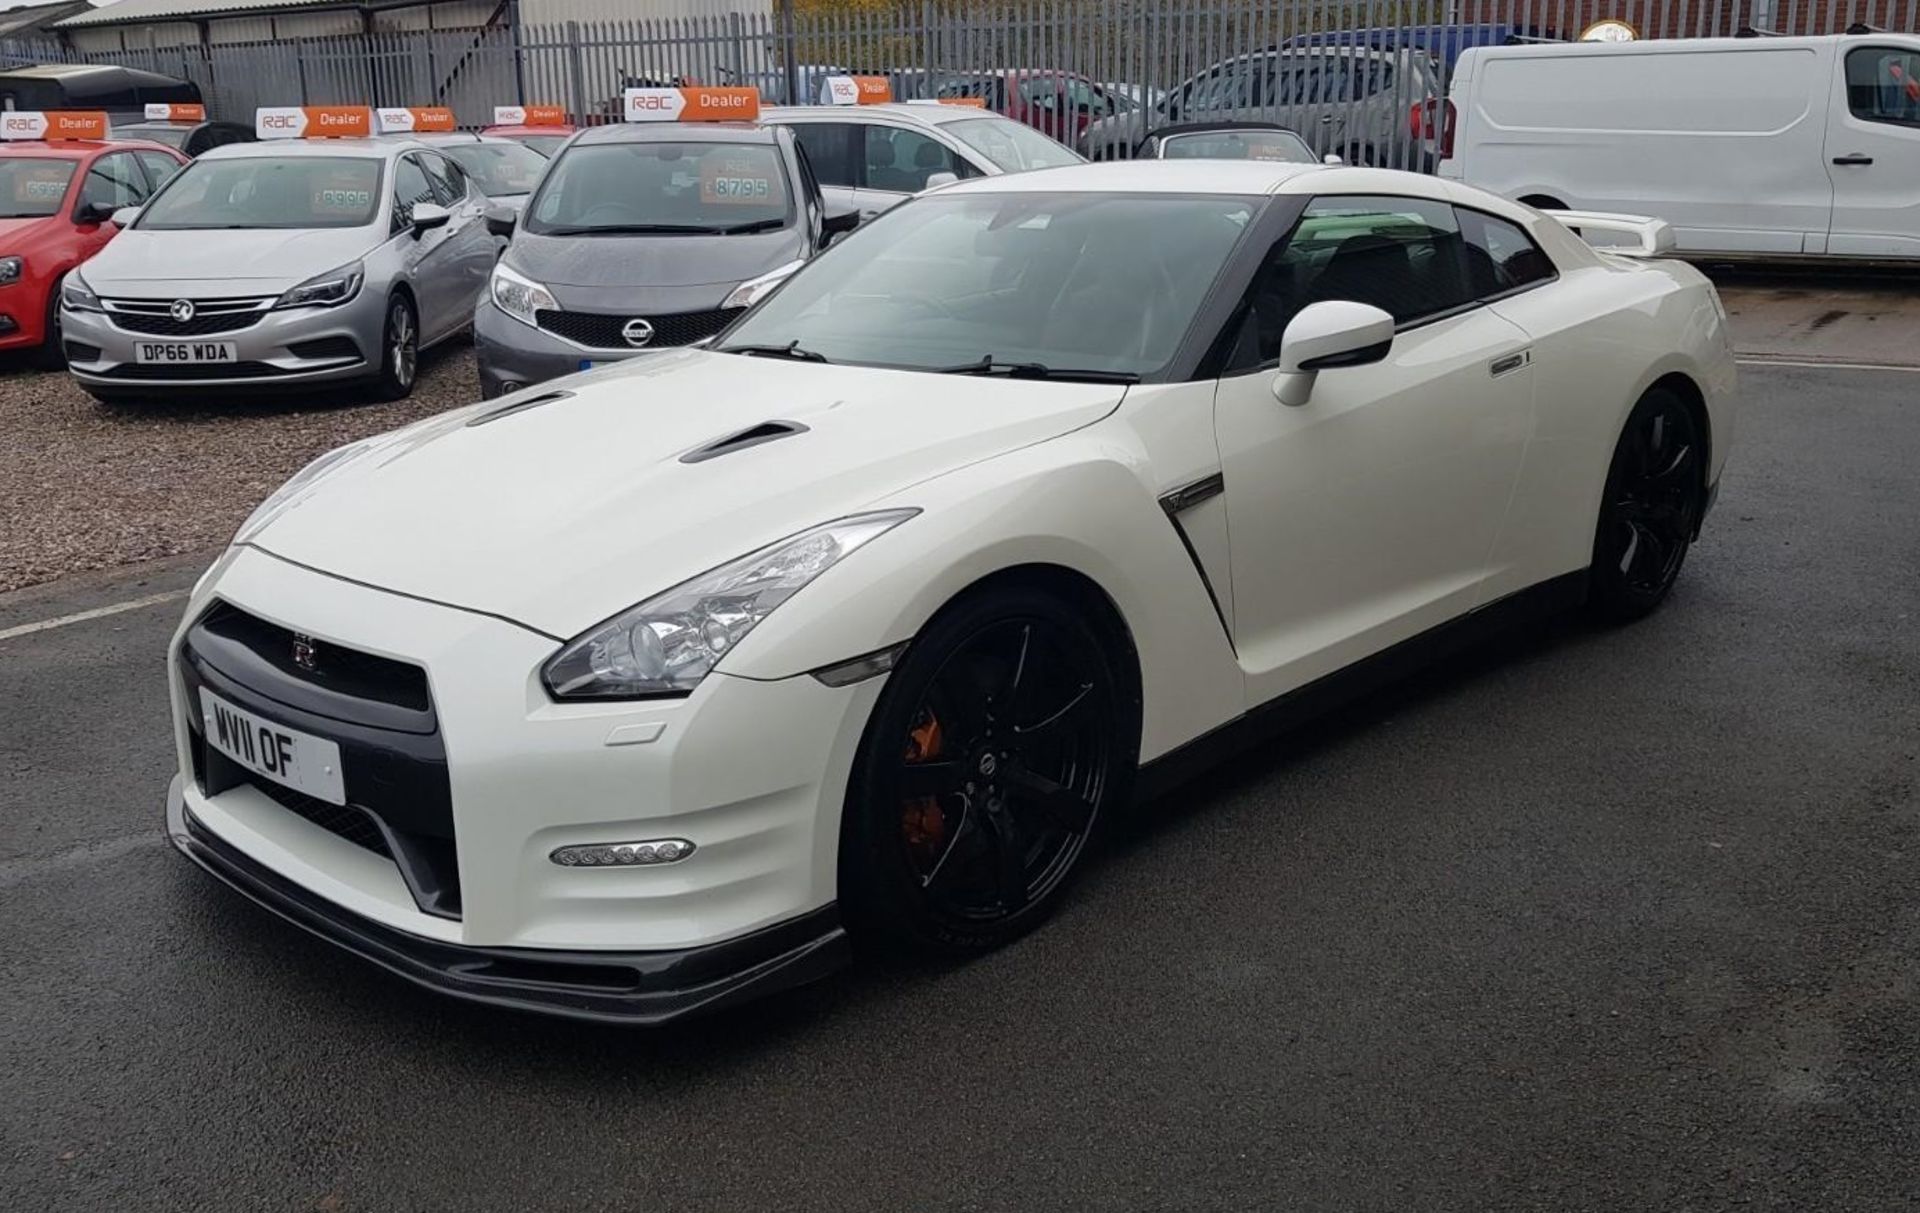 2011 NISSAN GT-R R35 750 stage 5 PREMIUM EDITION S-A 1 OWNER FROM NEW 20K MILES WARRANTED! - Bild 3 aus 7